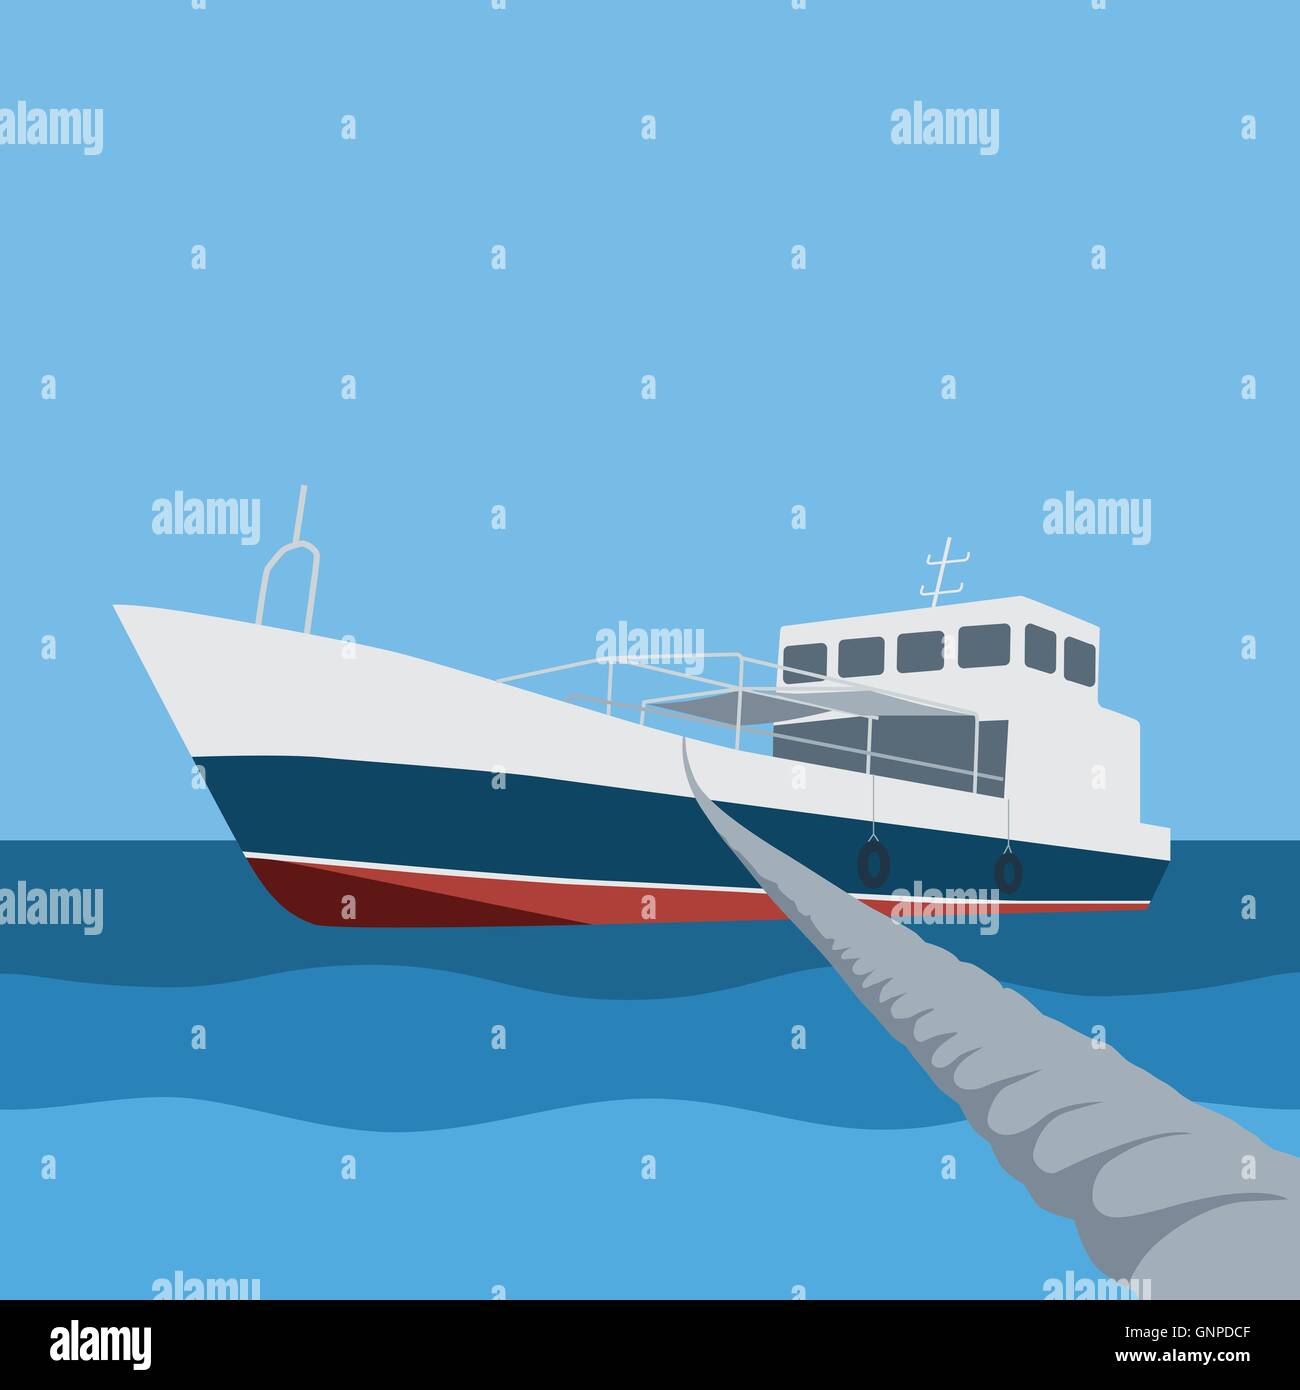 Boat in the sea moored with rope vector illustration Stock Vector